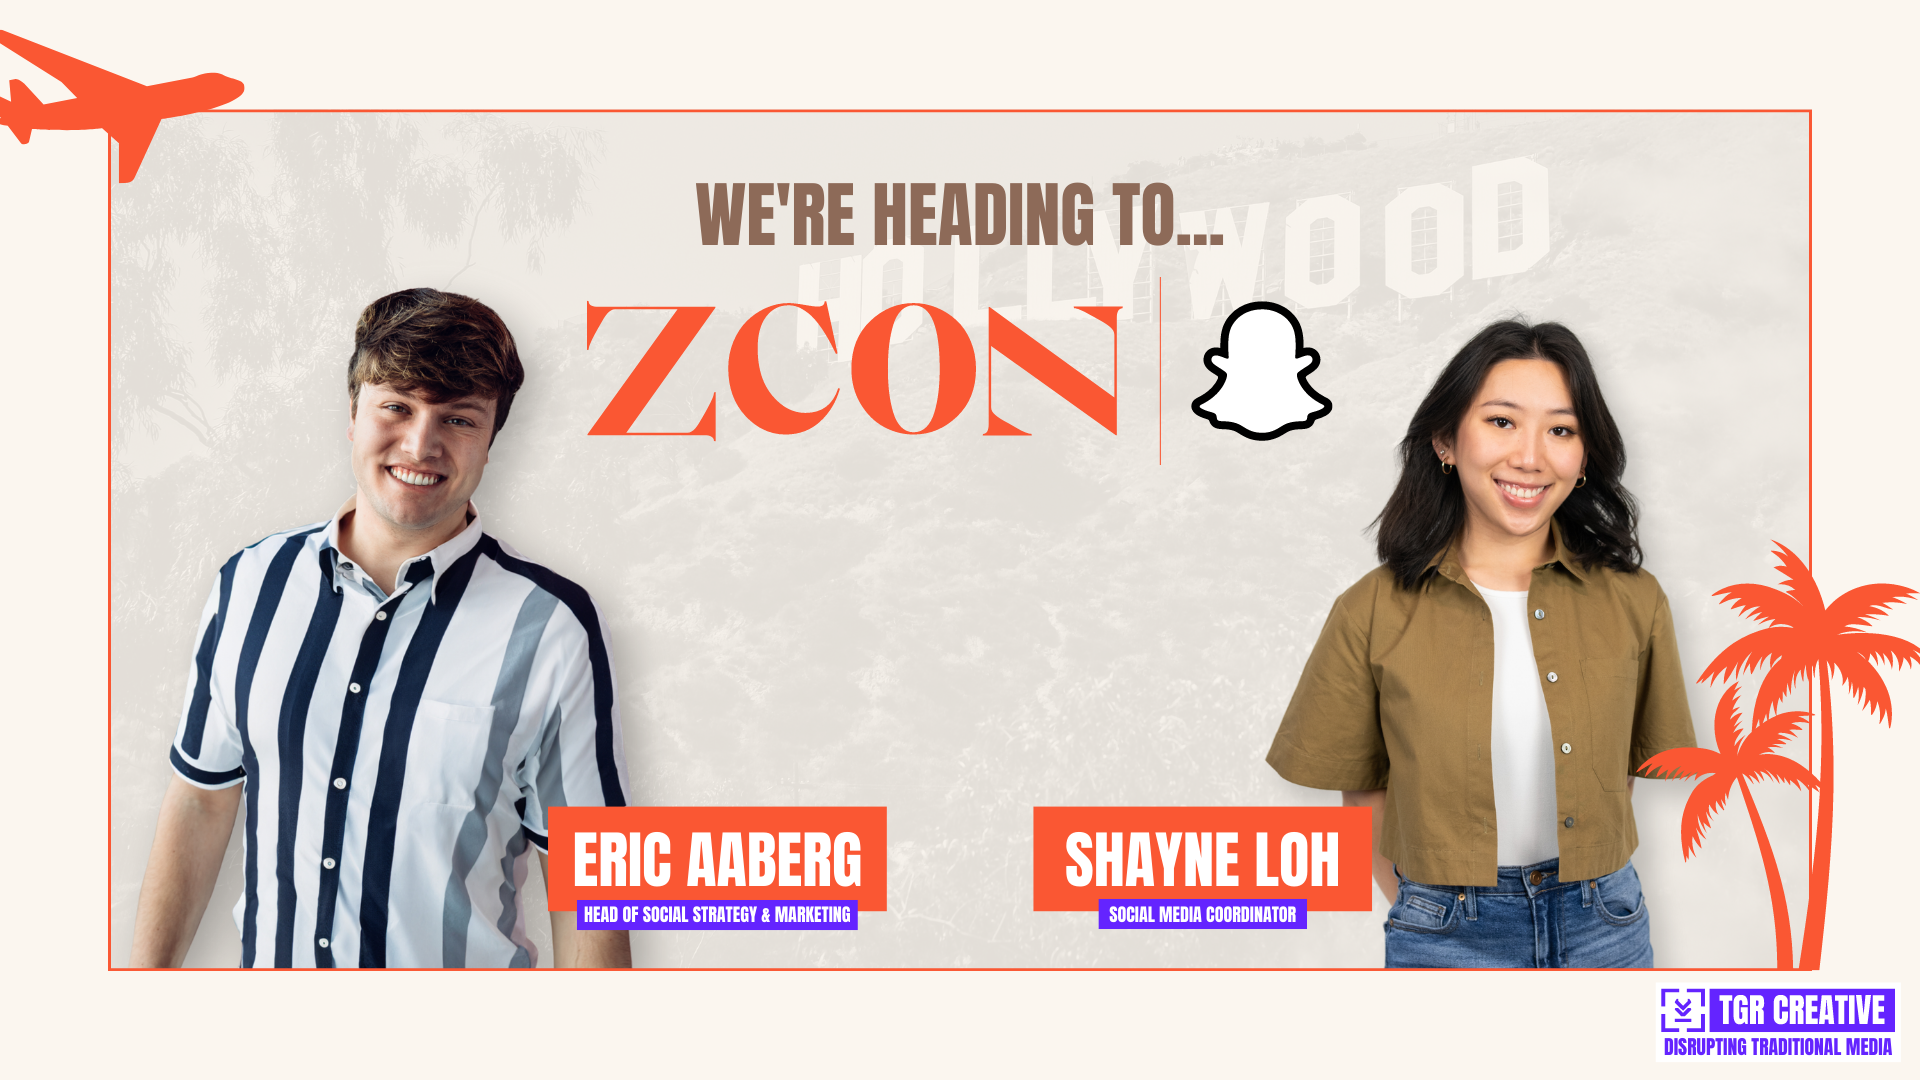 TGR Creative heads to ZCON: First Genz Conference